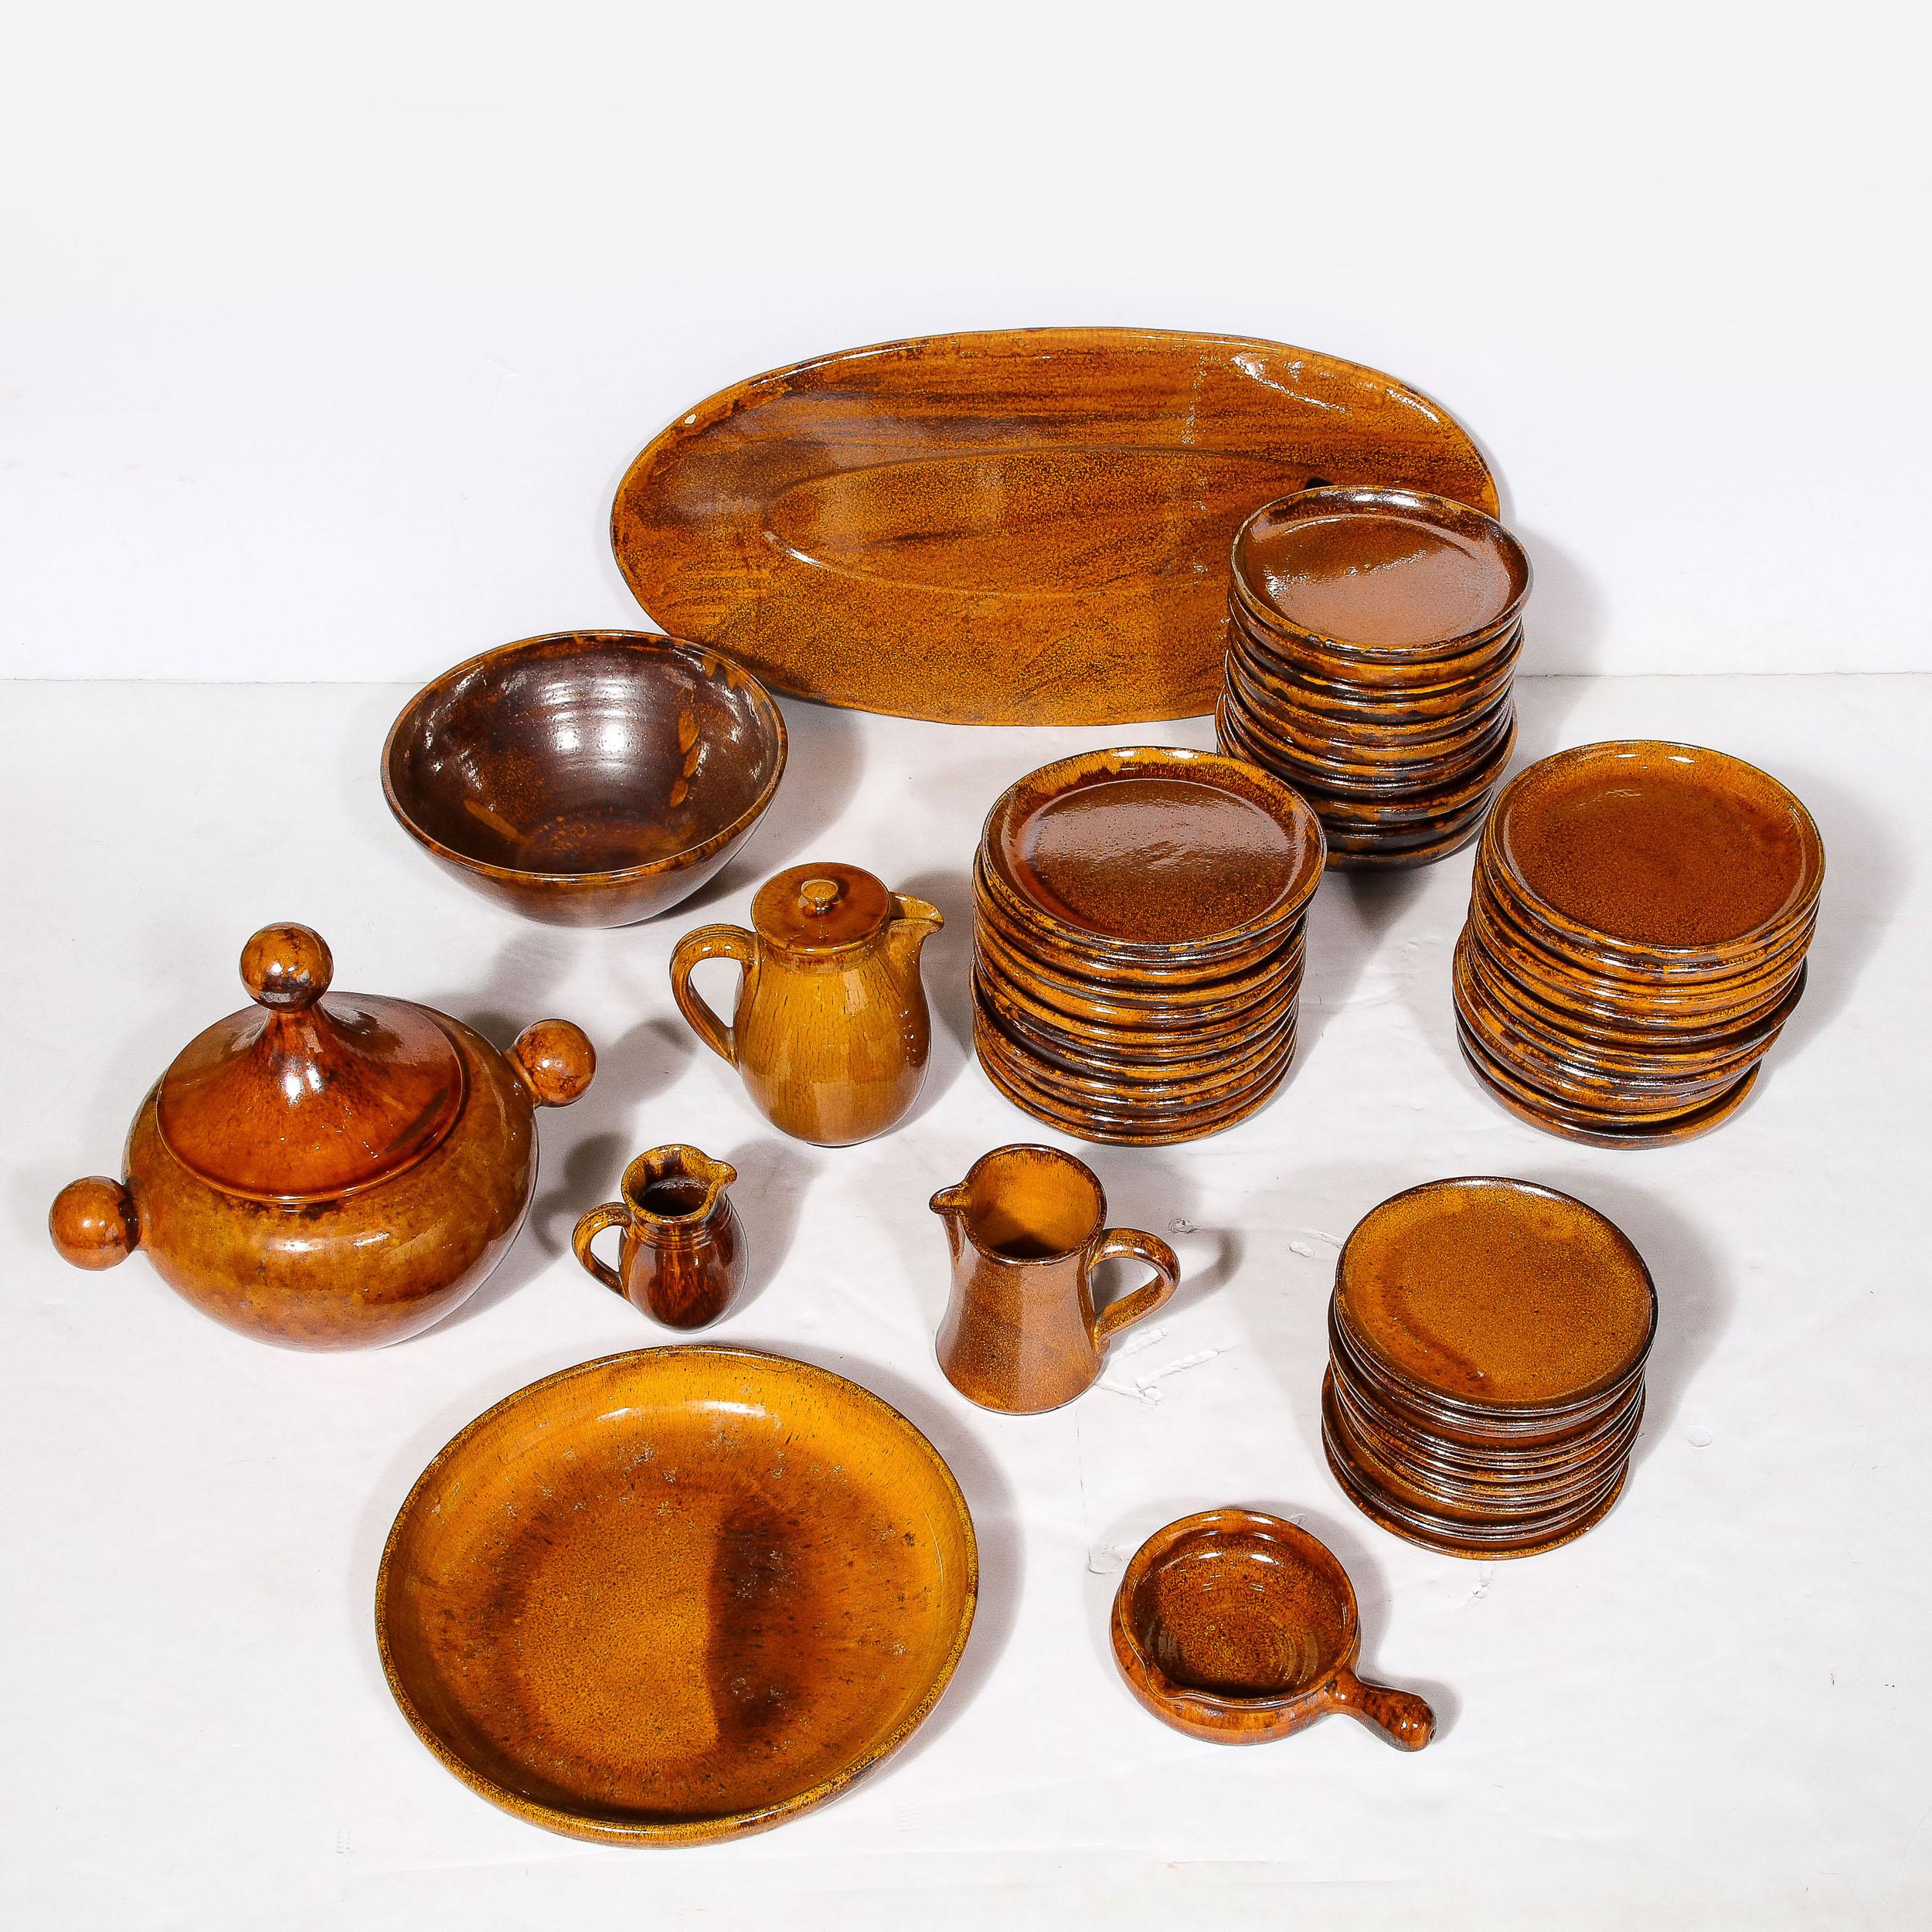 This rare and stunning Mid-Century Modernist Serveware Set for twelve by Vieux Biot originates from France, Circa 1950. Featuring a large variety of pieces sufficient for large gatherings and complex meals, these pieces are hand-made in the